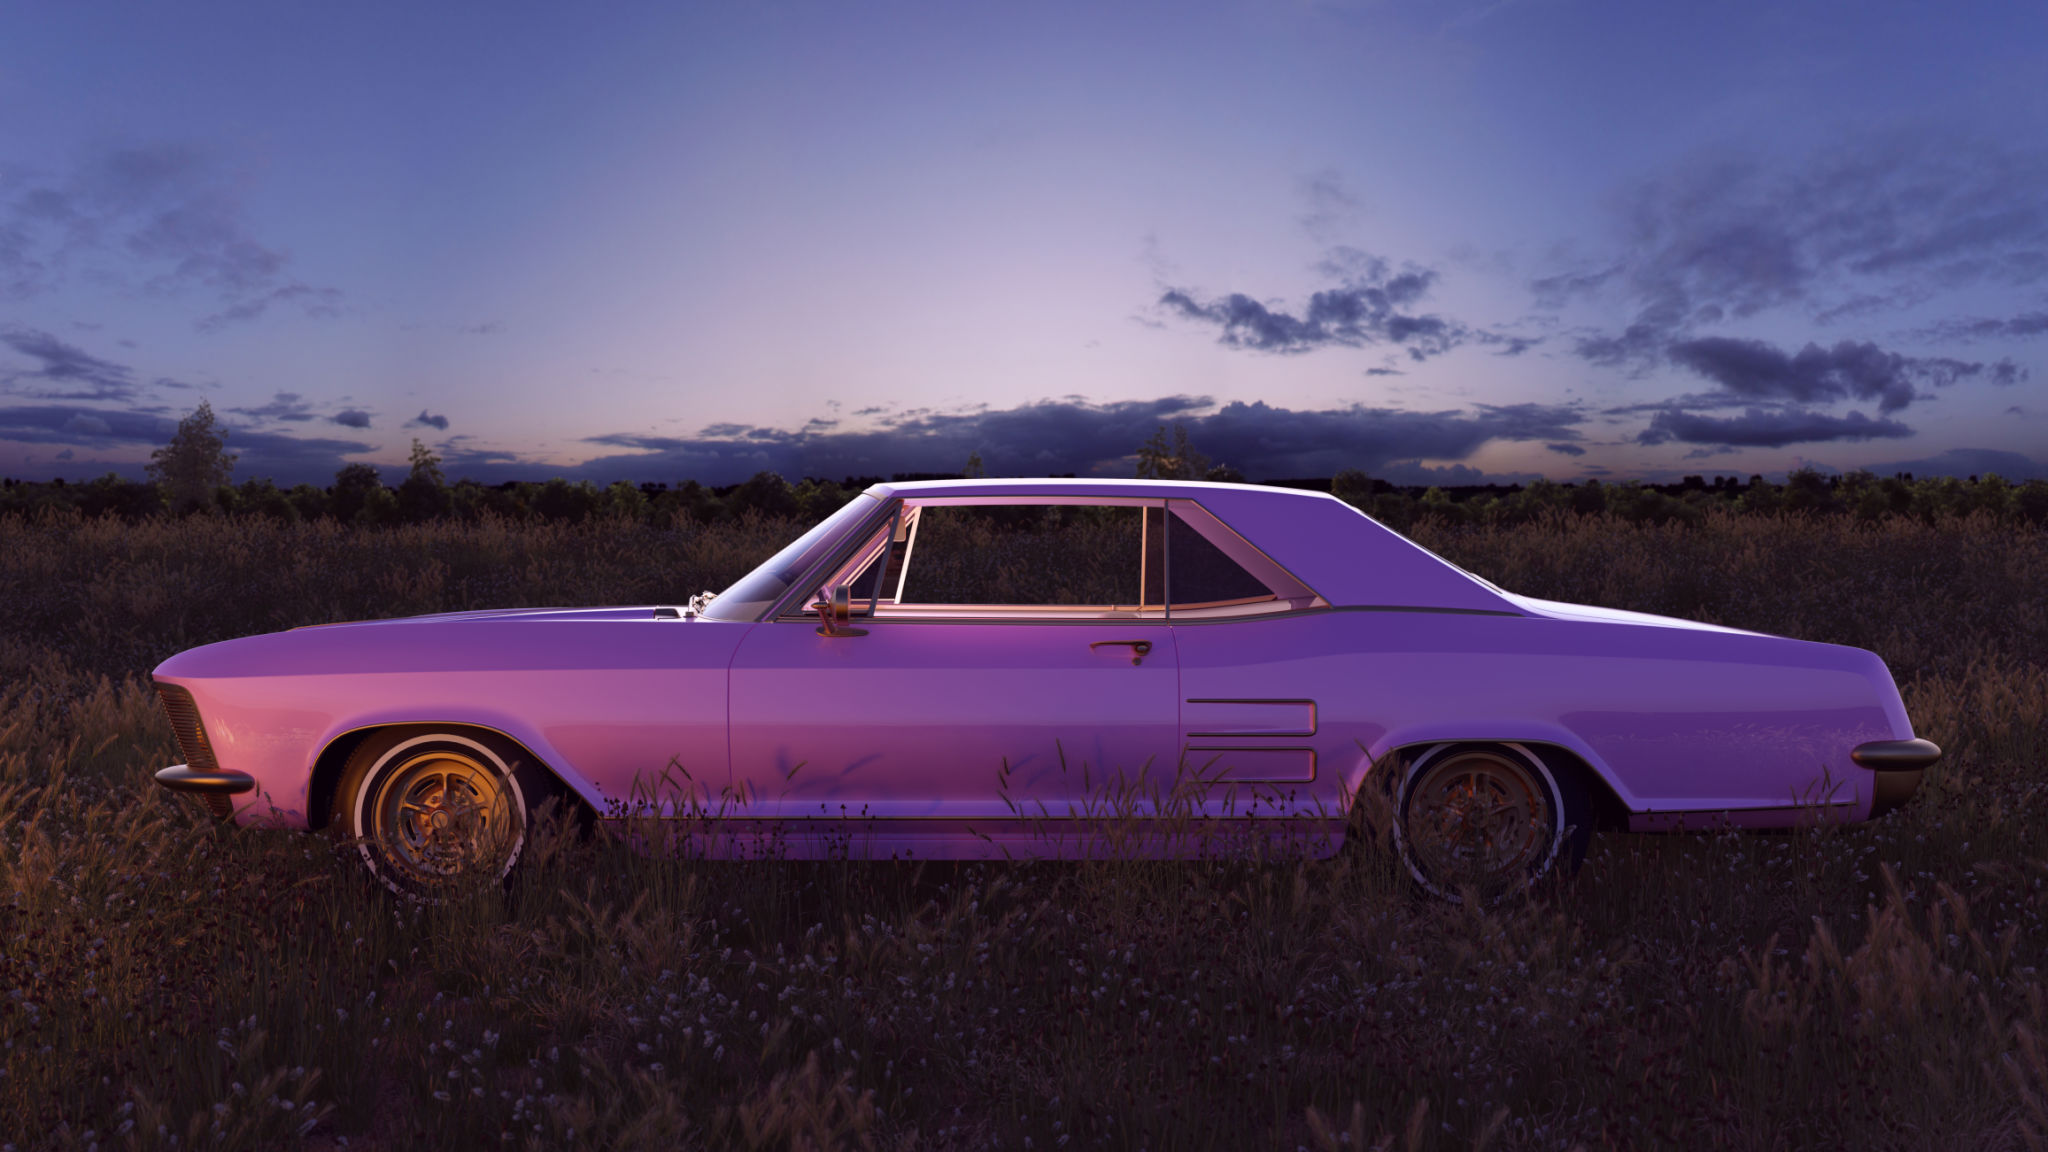 Pink 1970s American Classic Car in a Field at Sunset fine art photography